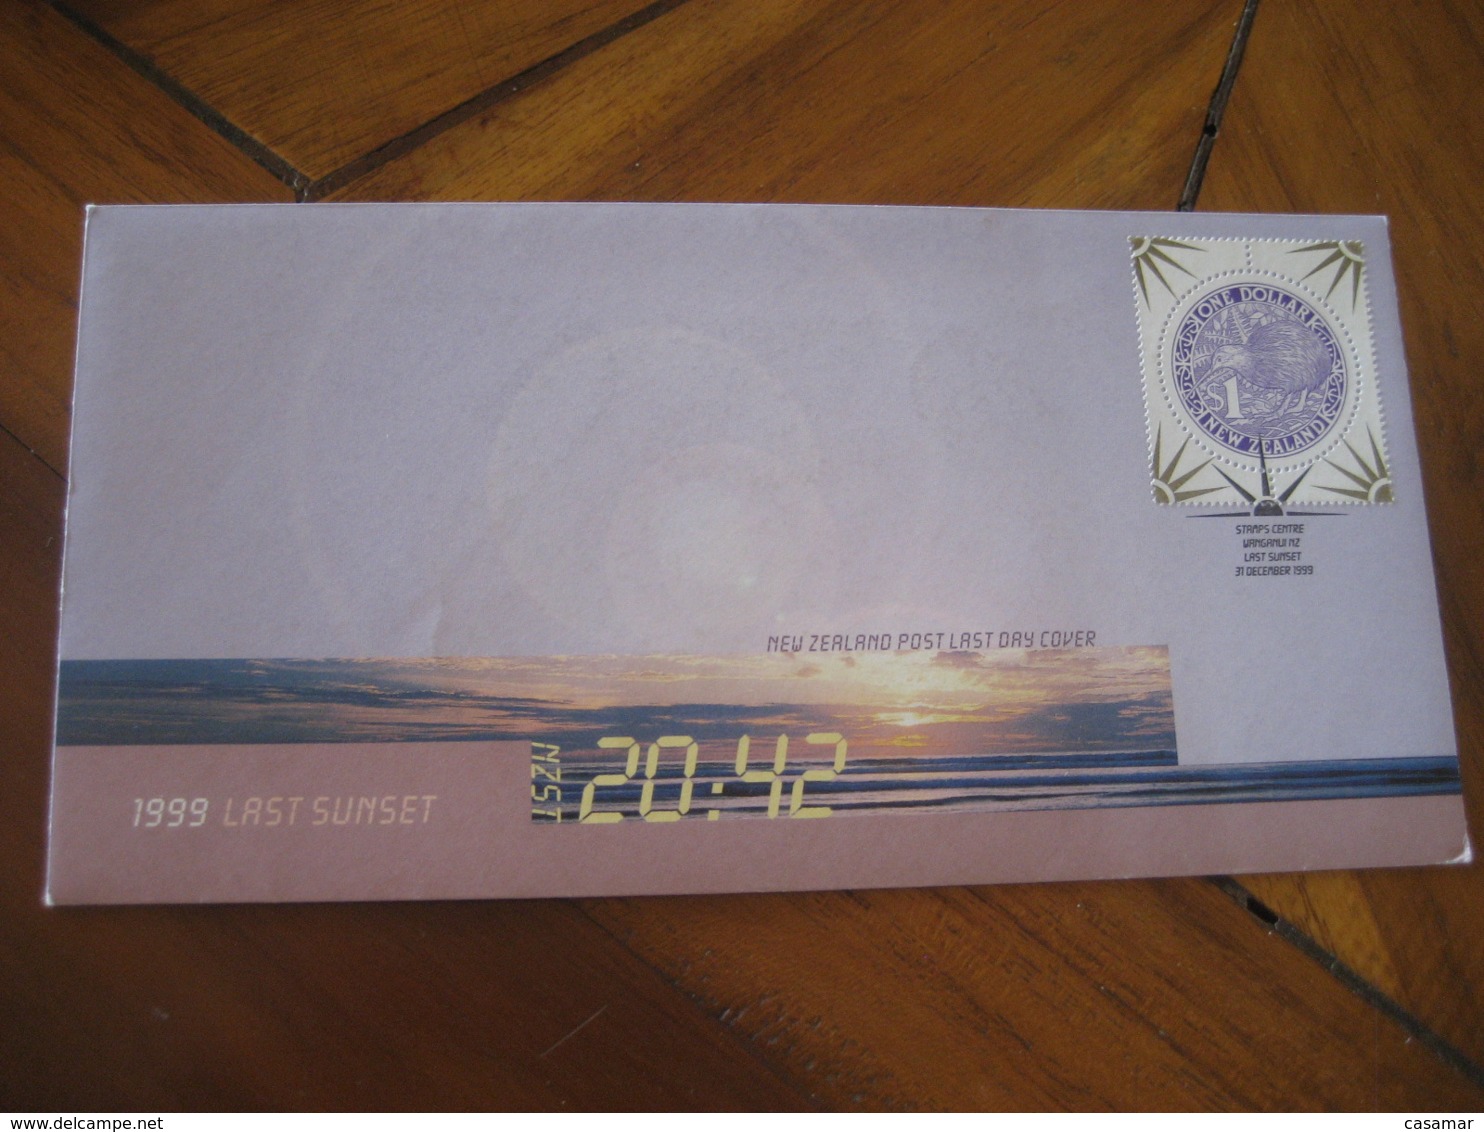 WANGANUI 1999 Meteorology Space Spatial LAST SUNSET 20:42 Invercargill Cancel Postal Stationery Cover NEW ZEALAND - Lettres & Documents